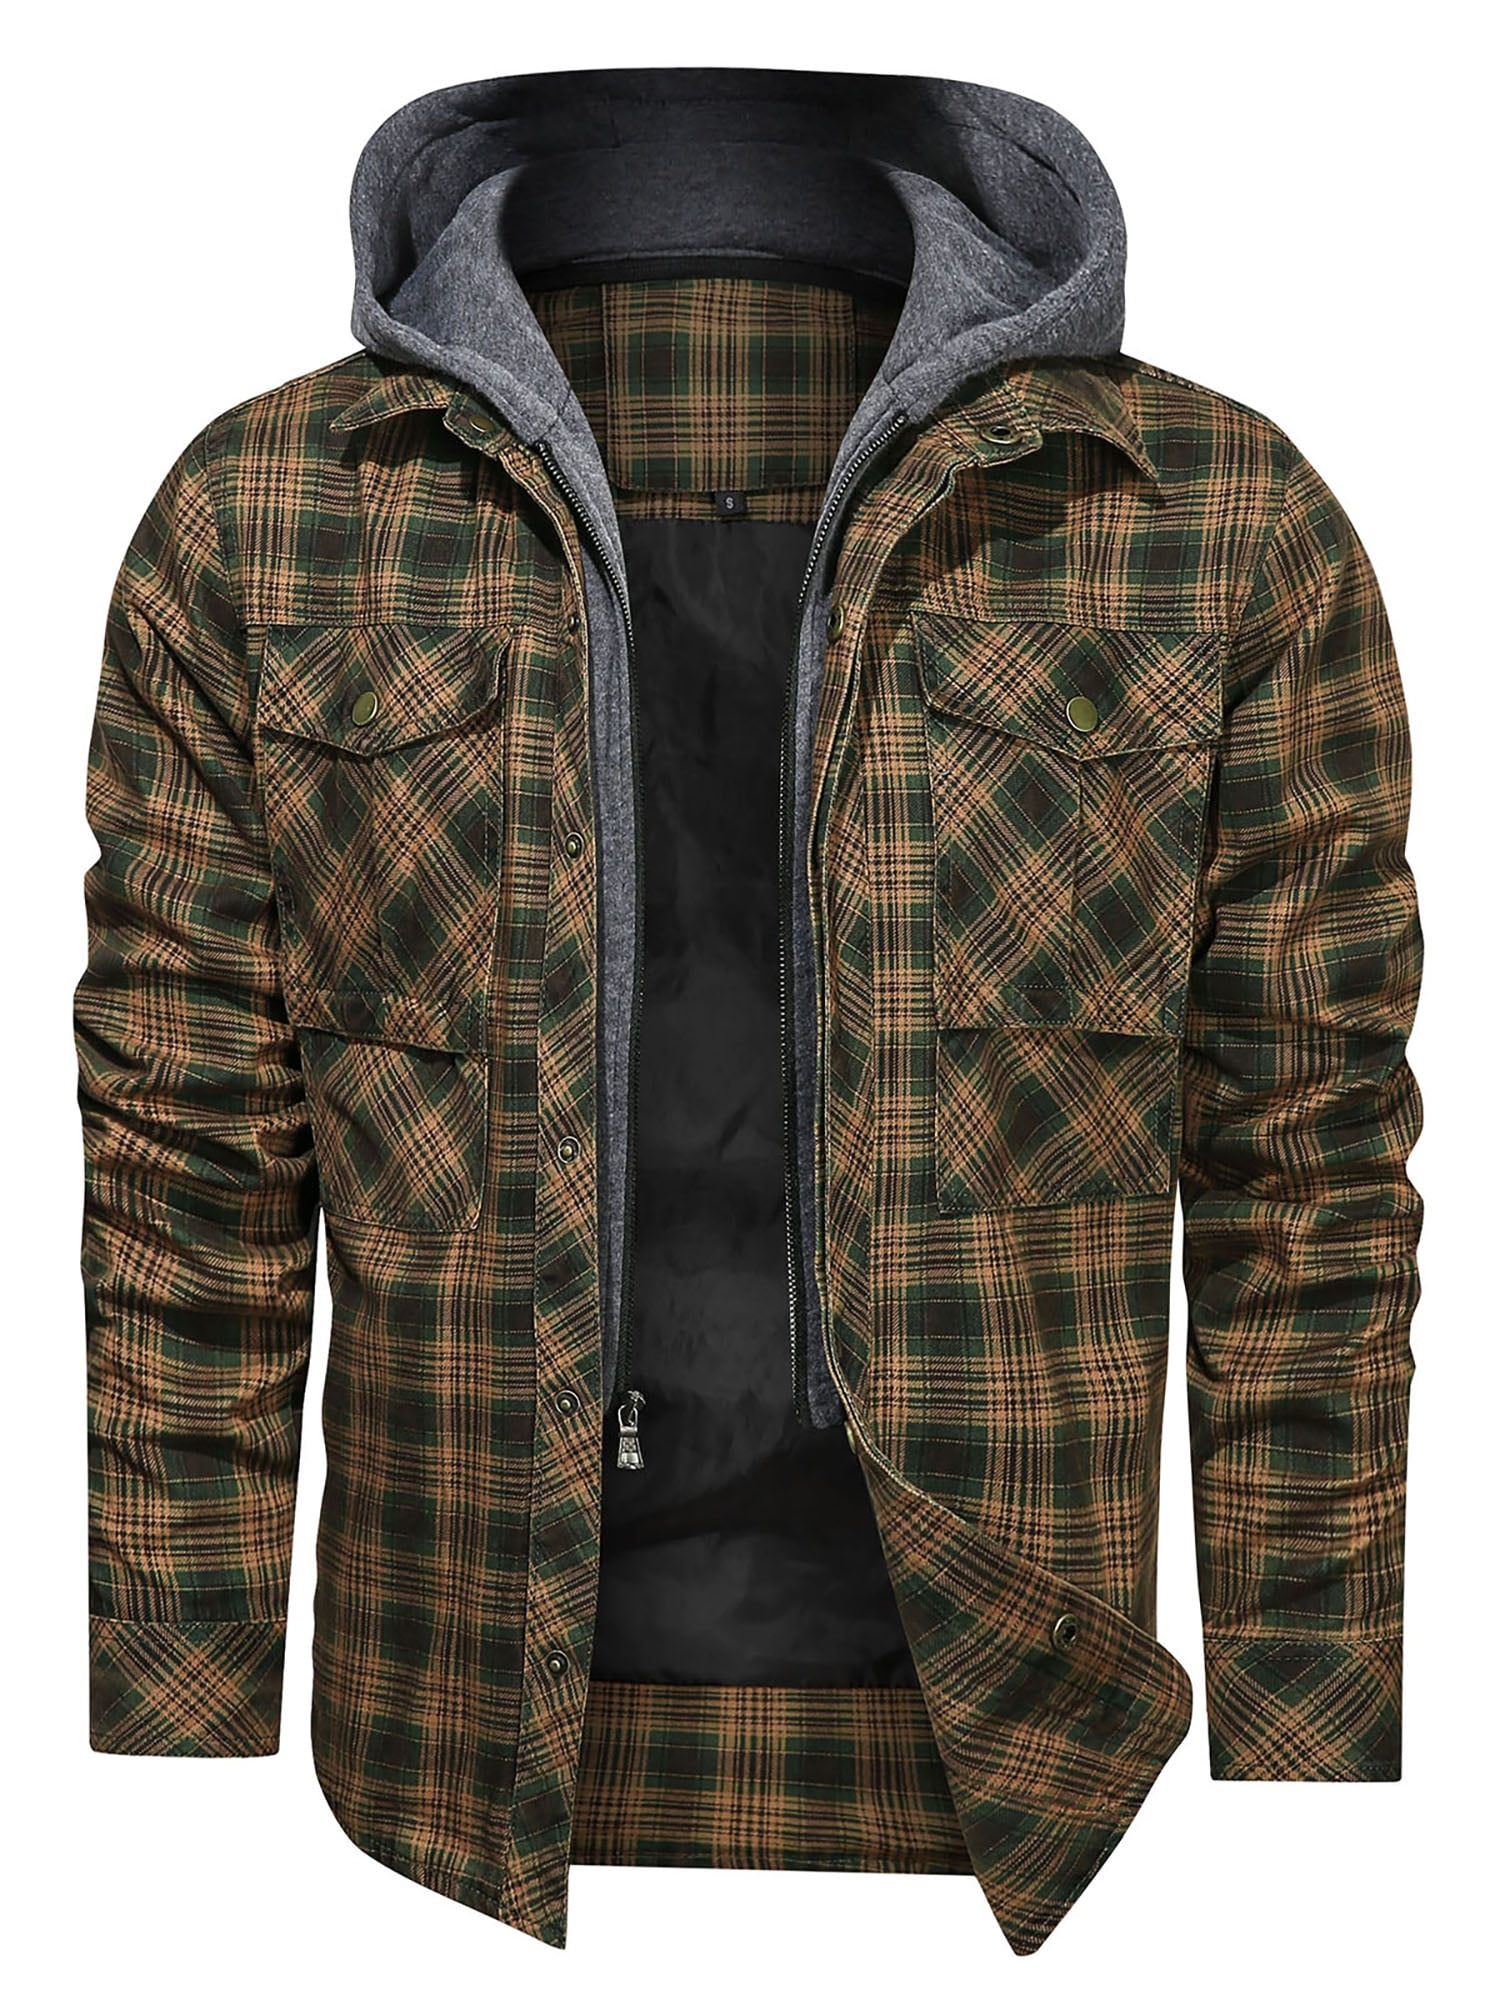 Anyvearon Men's Plaid Flannel Quilted Shirts Jacket with Removable Hood ...